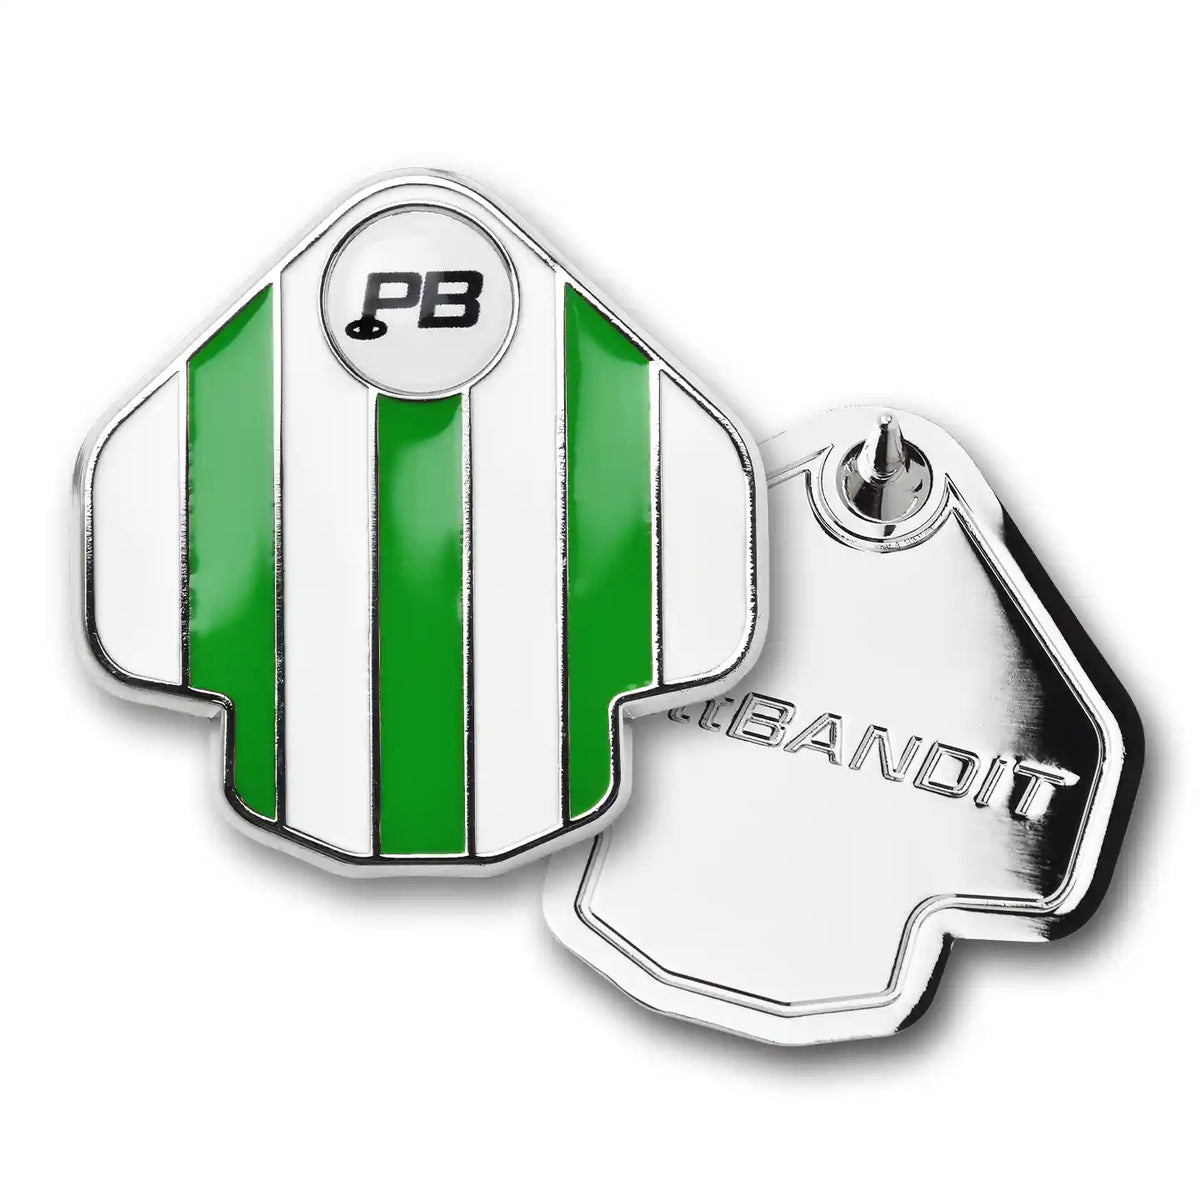 PuttBANDIT LP green ball marker top surface and polished metal baseplate